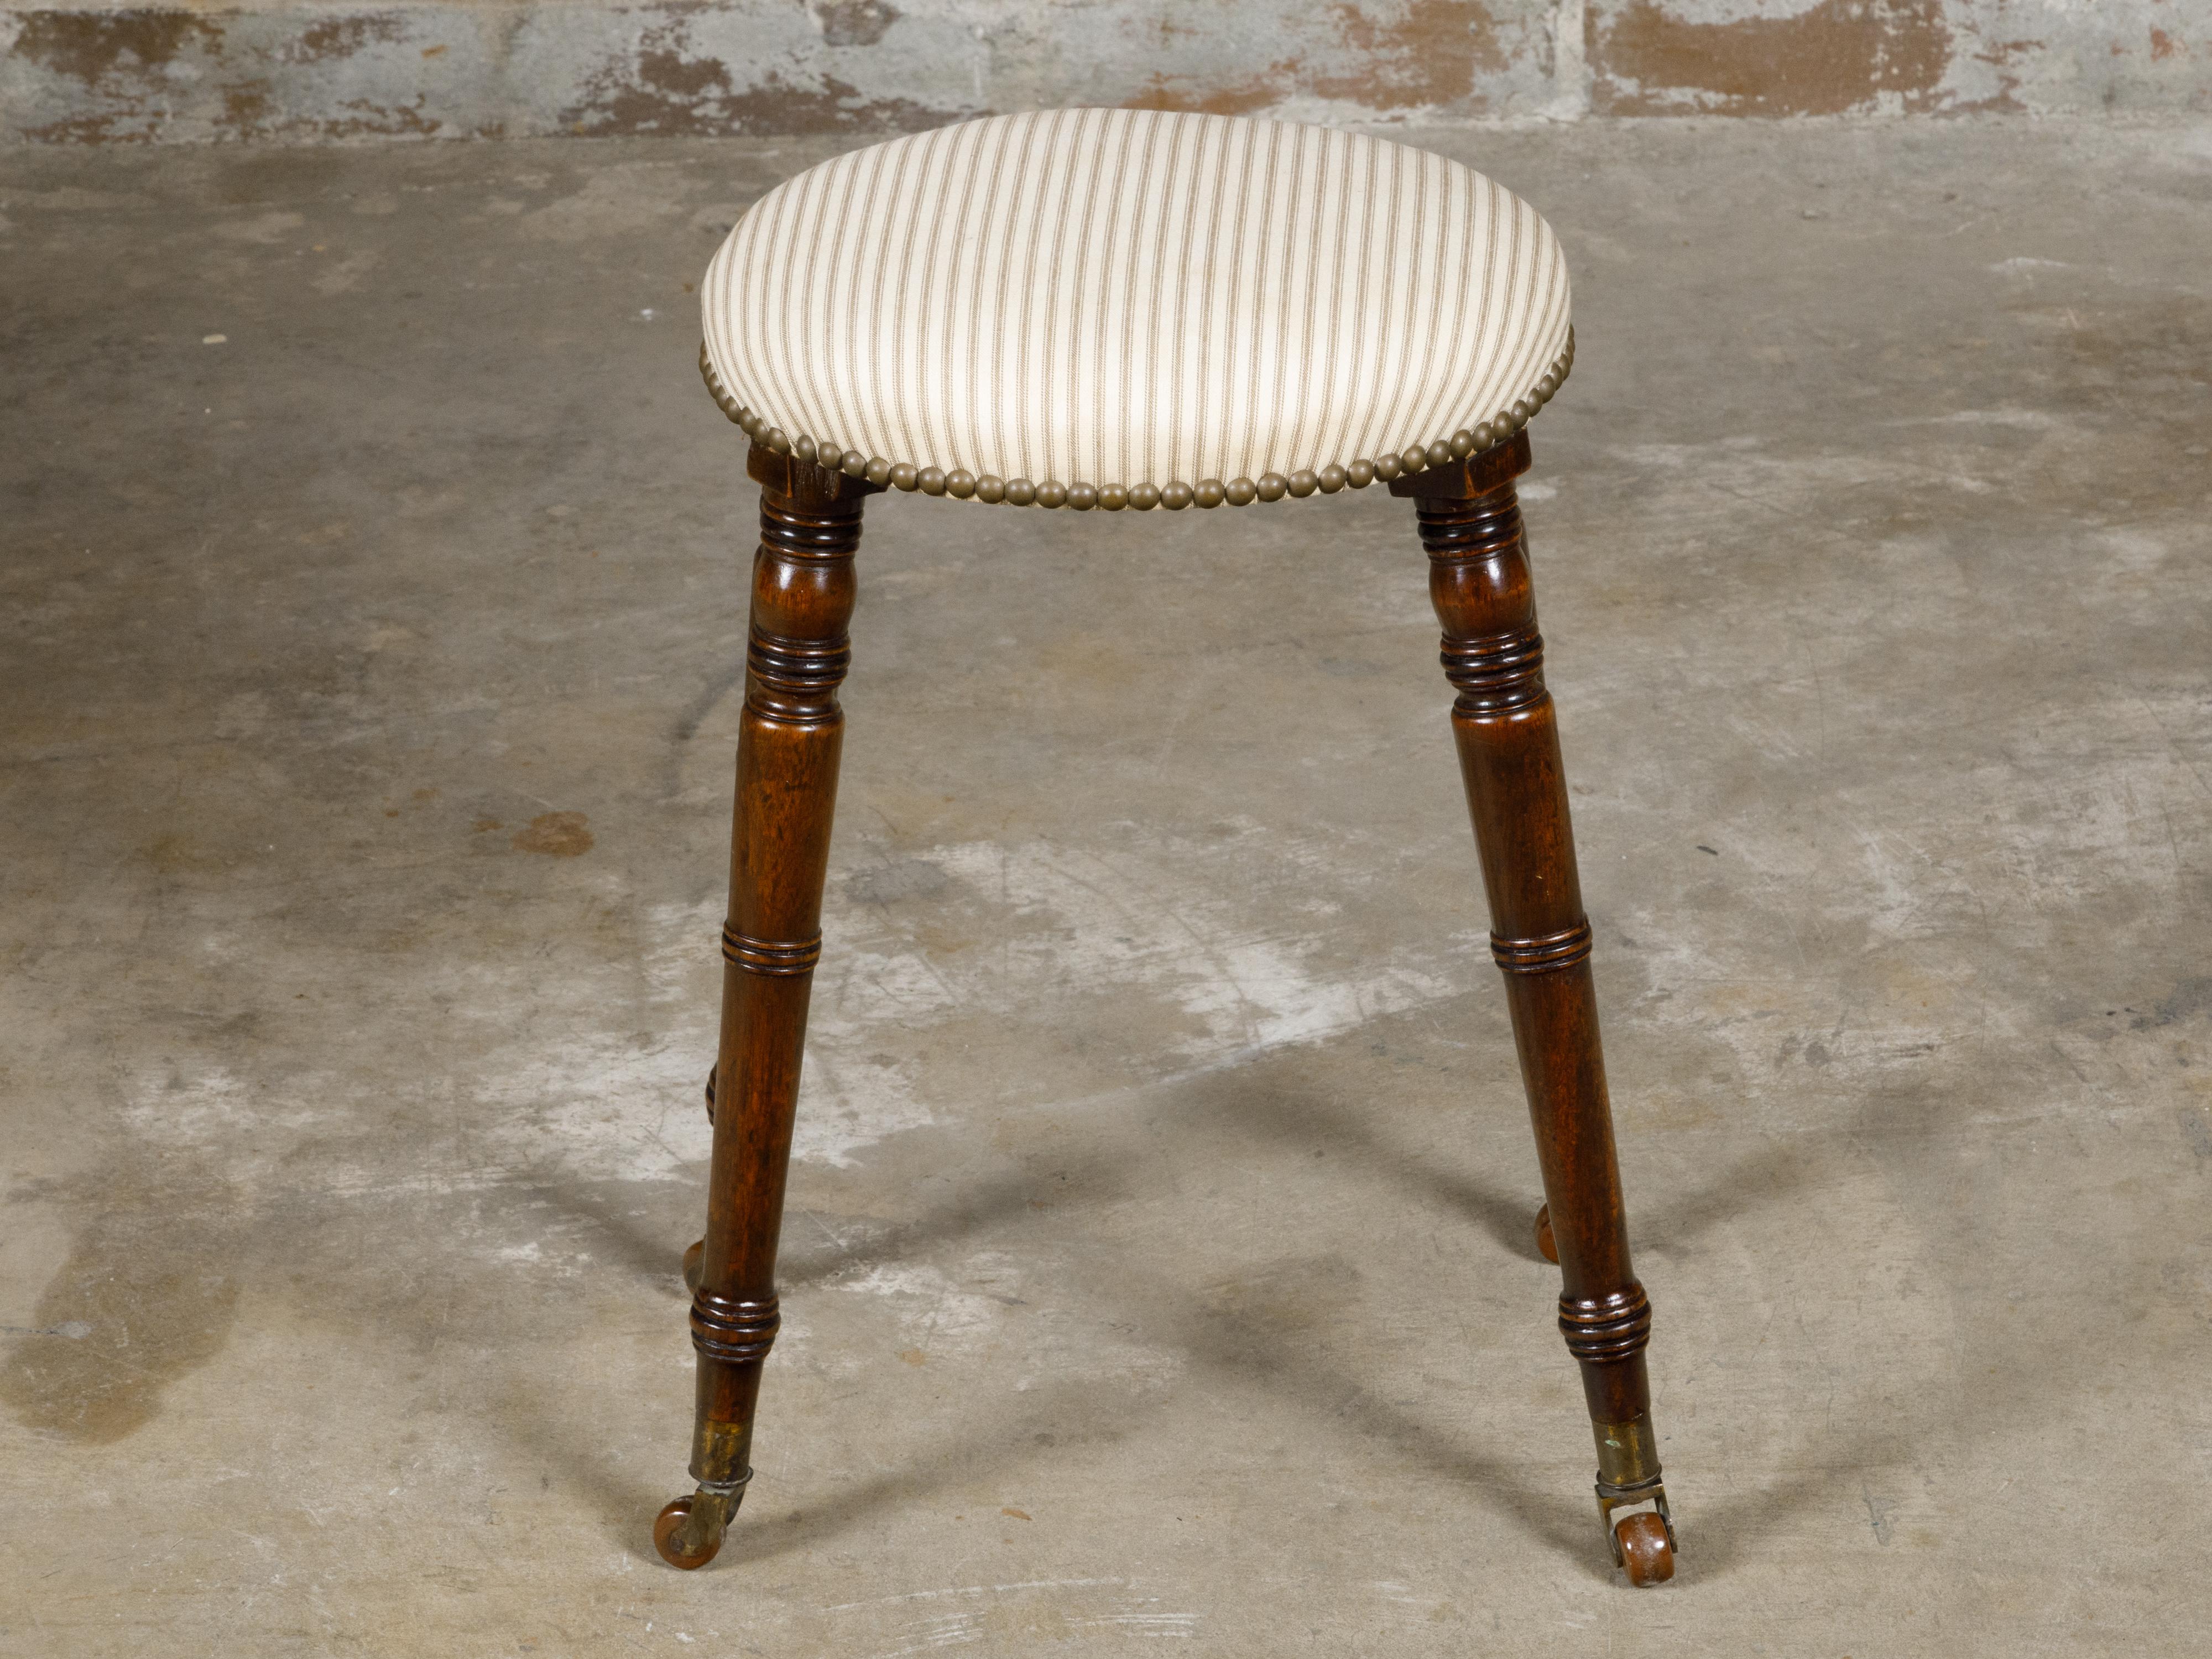 English Turned Oak 19th Century Stool on Casters with Oval Upholstered Seat For Sale 5